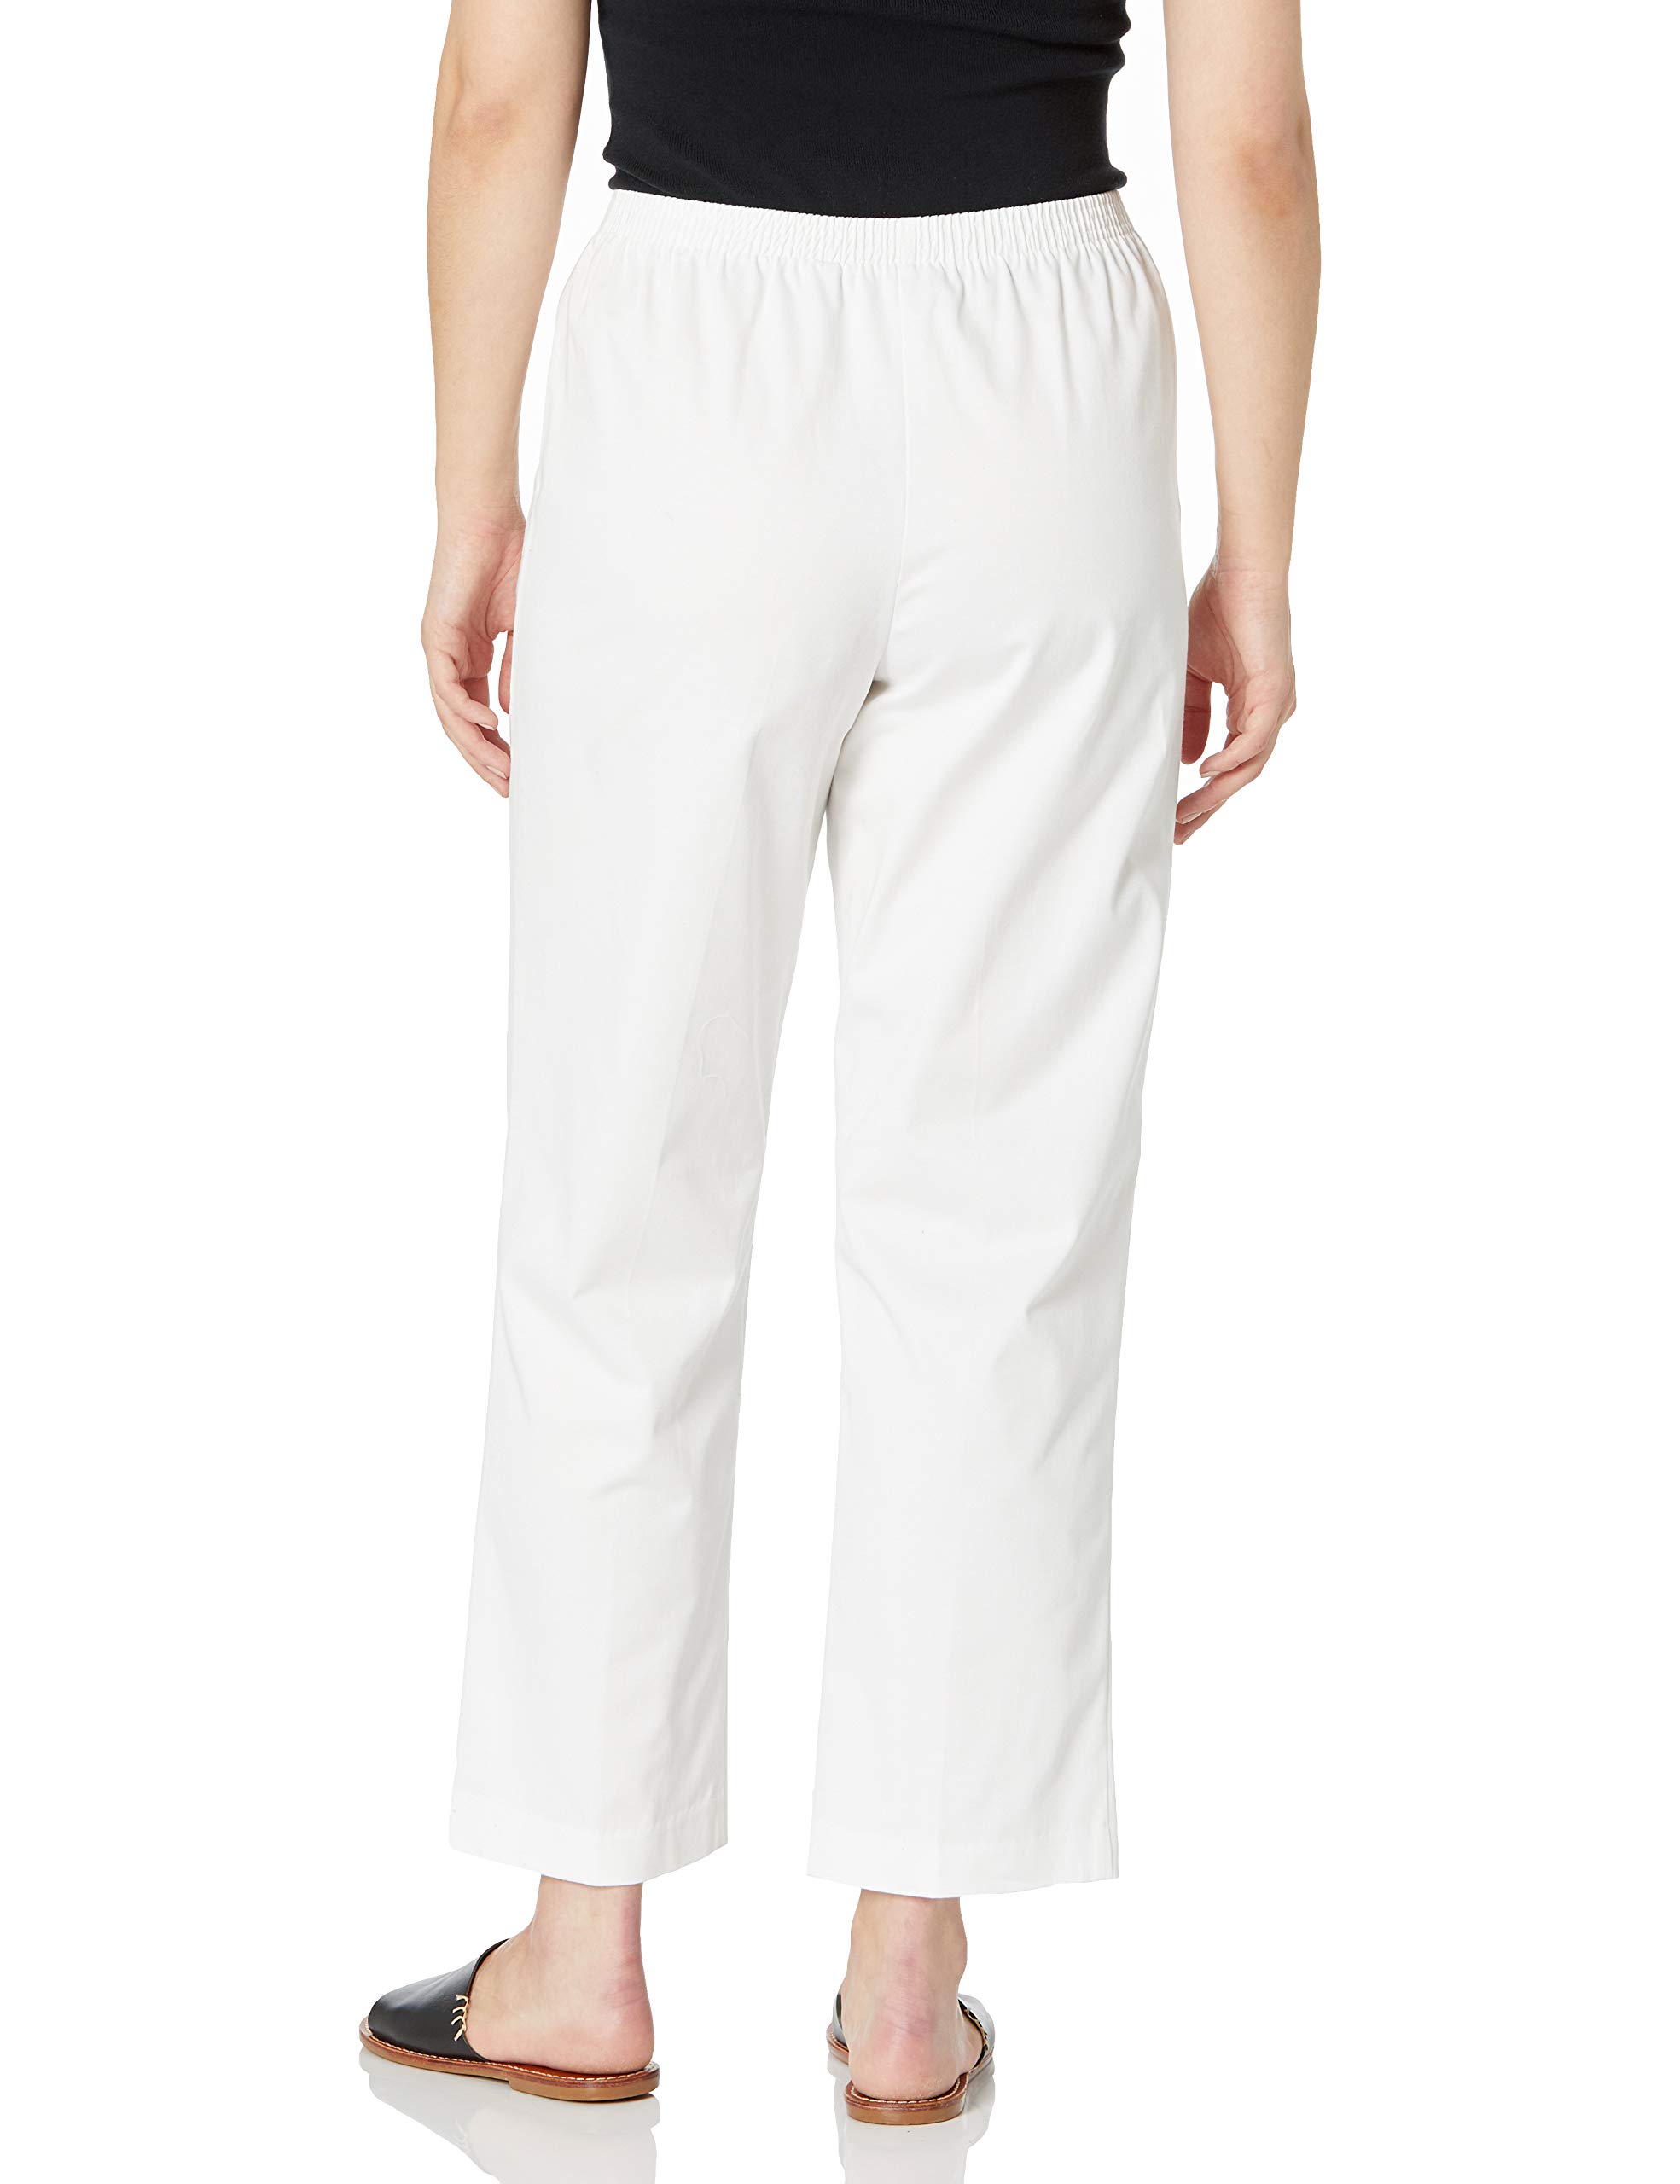 Alfred Dunner All Around Elastic Waist Cotton Short Twill Pants